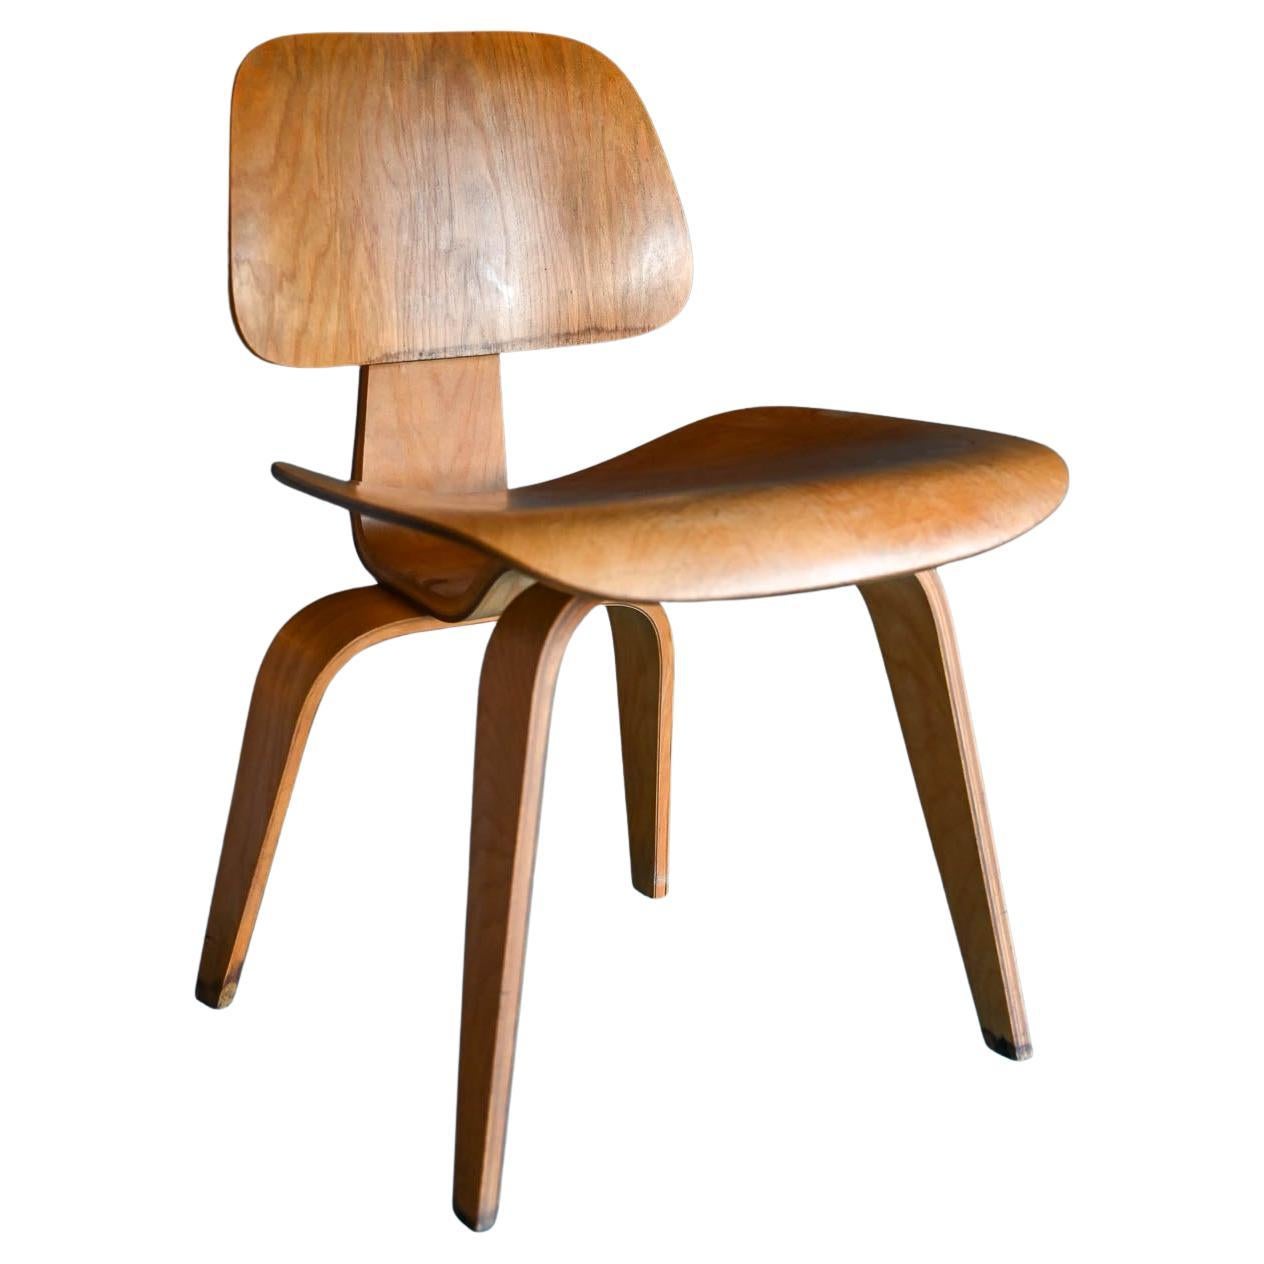 Early Eames DCW in Ash, ca. 1955.  Iconic and classic Charles Eames for Herman Miller DCW (dining chair wood) in Ash.  Marked with impressed DCW on underside.  This chair is in good overall condition.